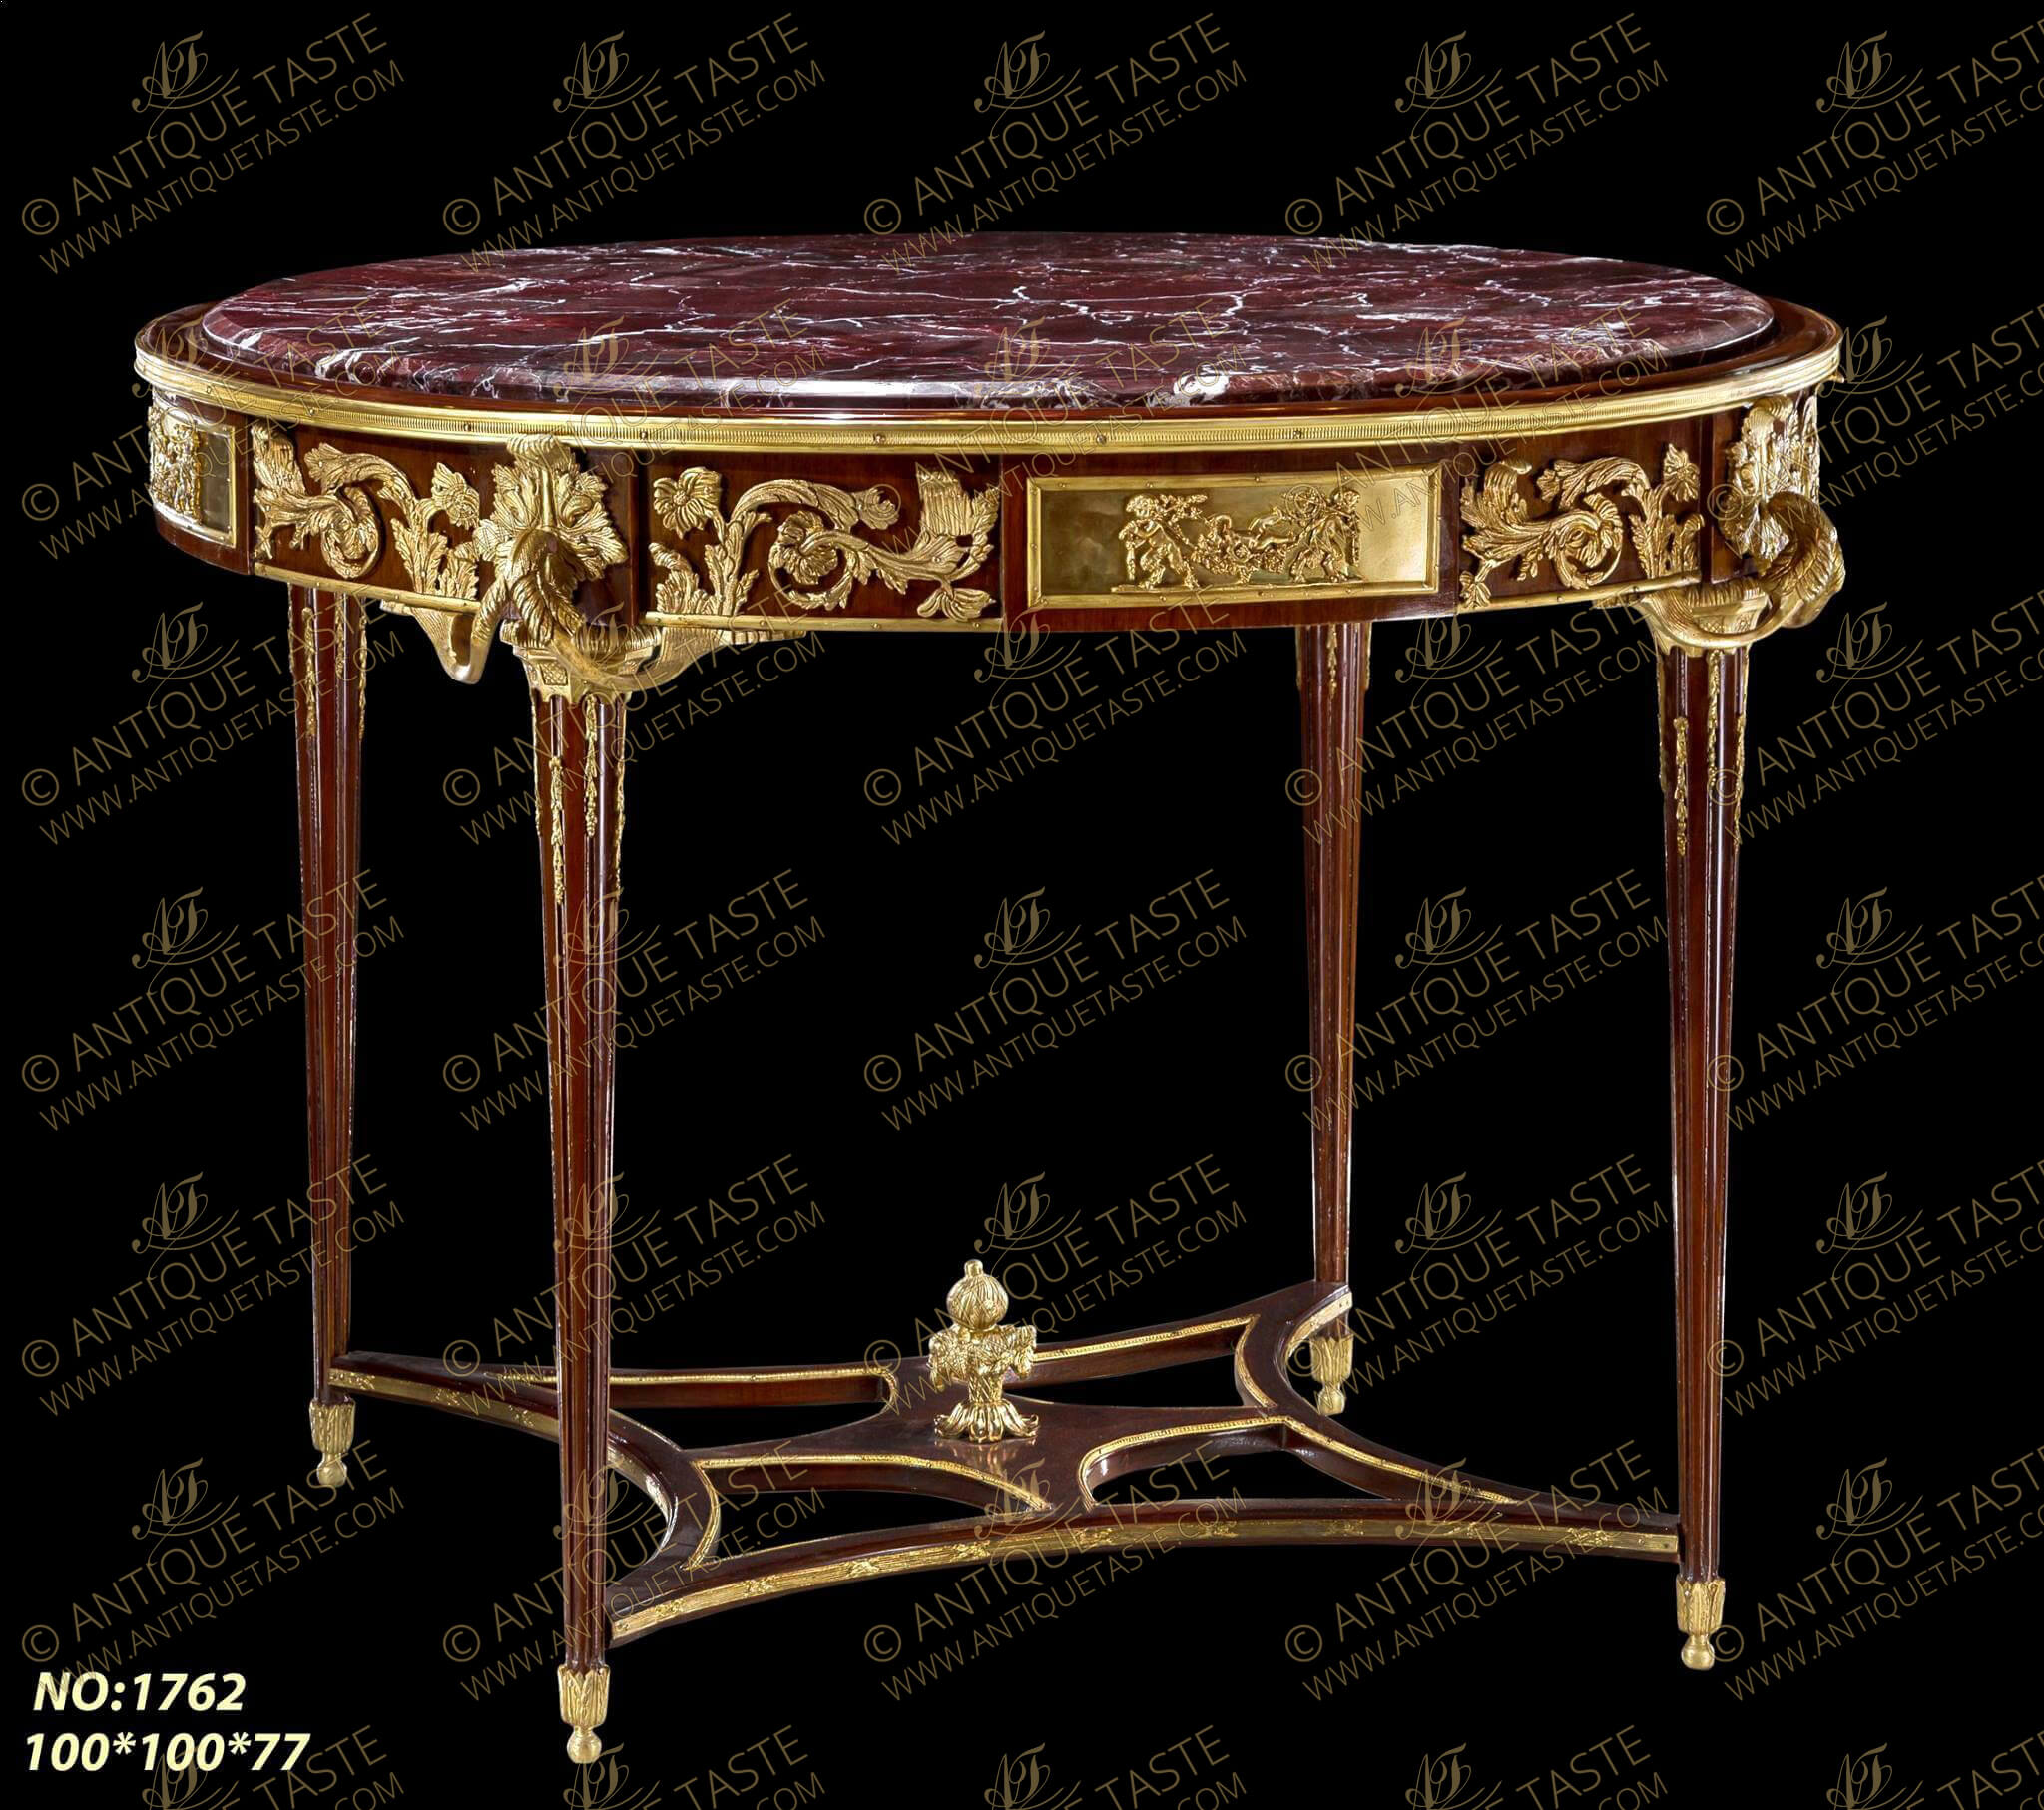 louis xvi style Grand guéridon, after the model made by François Linke after the celebrated model of the Table des Muses commissioned by Pierre-Elisabeth de Fontanieu for his use in the Hotel du Garde-meuble in 1771 and made by Jean-Henri Riesener, The inset marble top withing a wooden ormolu bordered frame above the frieze centered with a an ormolu tablet embellished with finely cast gilt-ormolu mounts depicting bacchanalian cherubs at play, surrounded with ormolu rococo style scrolled foliate motifs, Raised on tapering fluted ormolu pendants decorated legs terminating in foliate-cast sabots joined by a pierced stretcher centered with and ormolu urn of prosperity and edged with ormolu strip-works, Each leg surmounting block with an acanthus mount issuing fine chiseled scrolled acanthus and foliage, We made this table with some modifications to Linke Grand guéridon Louis XVI, pietment de la table Muse, dessus marbre assemblés, bronzes dorés mats, As Linke states in his title, this table is a creation by Linke based on the celebrated Table des Muses commissioned by Pierre-Elisabeth de Fontanieu for his use in the Hotel du Garde-meuble in 1771 and made by Jean-Henri Riesener